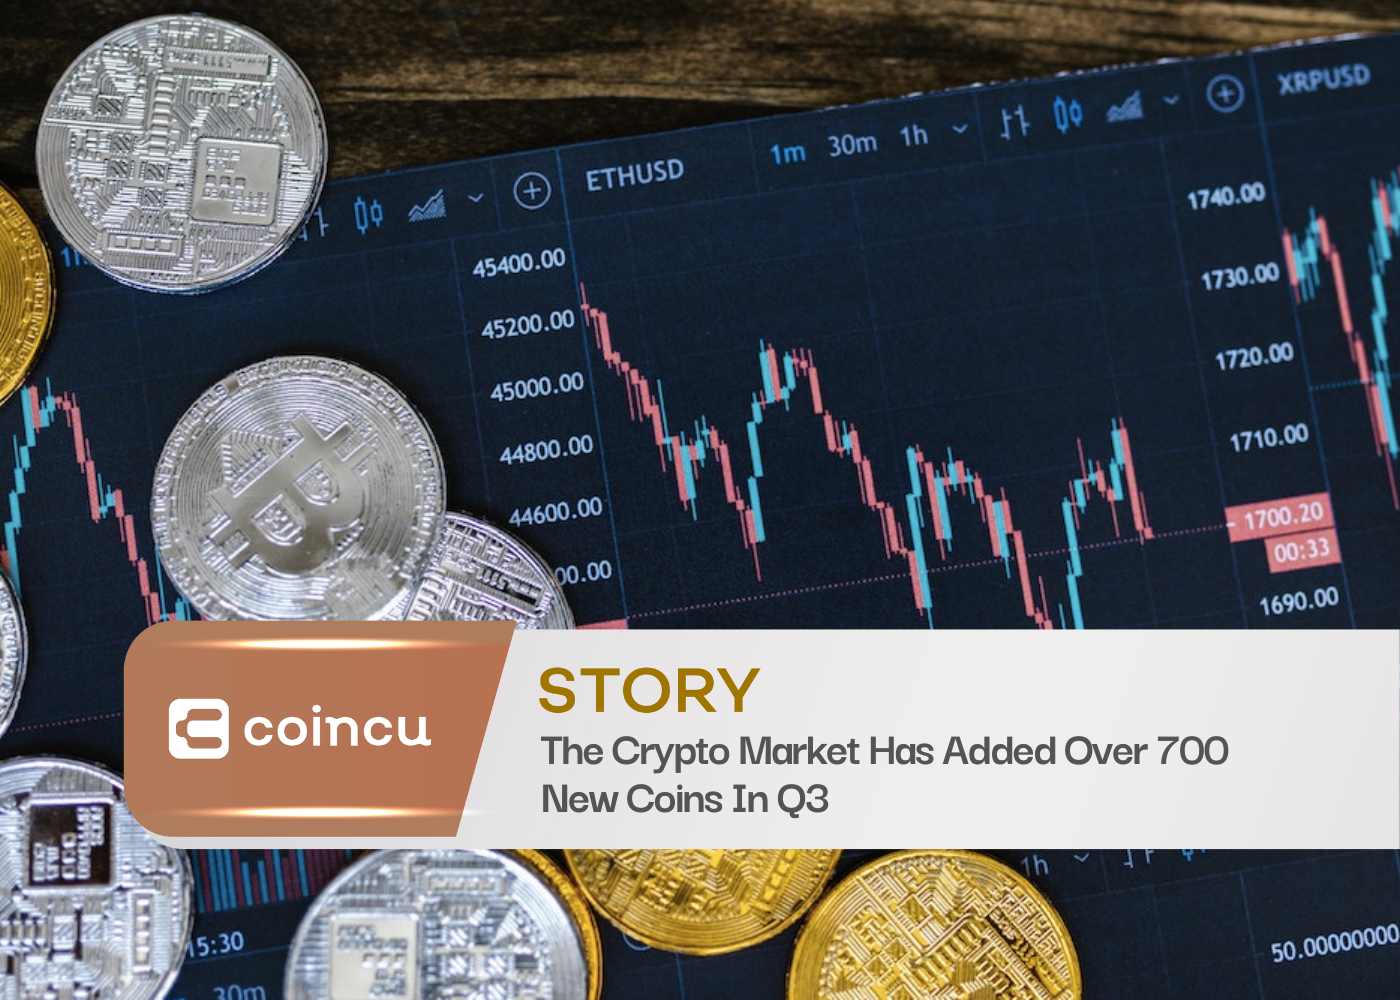 The Crypto Market Has Added Over 700 New Coins In Q3